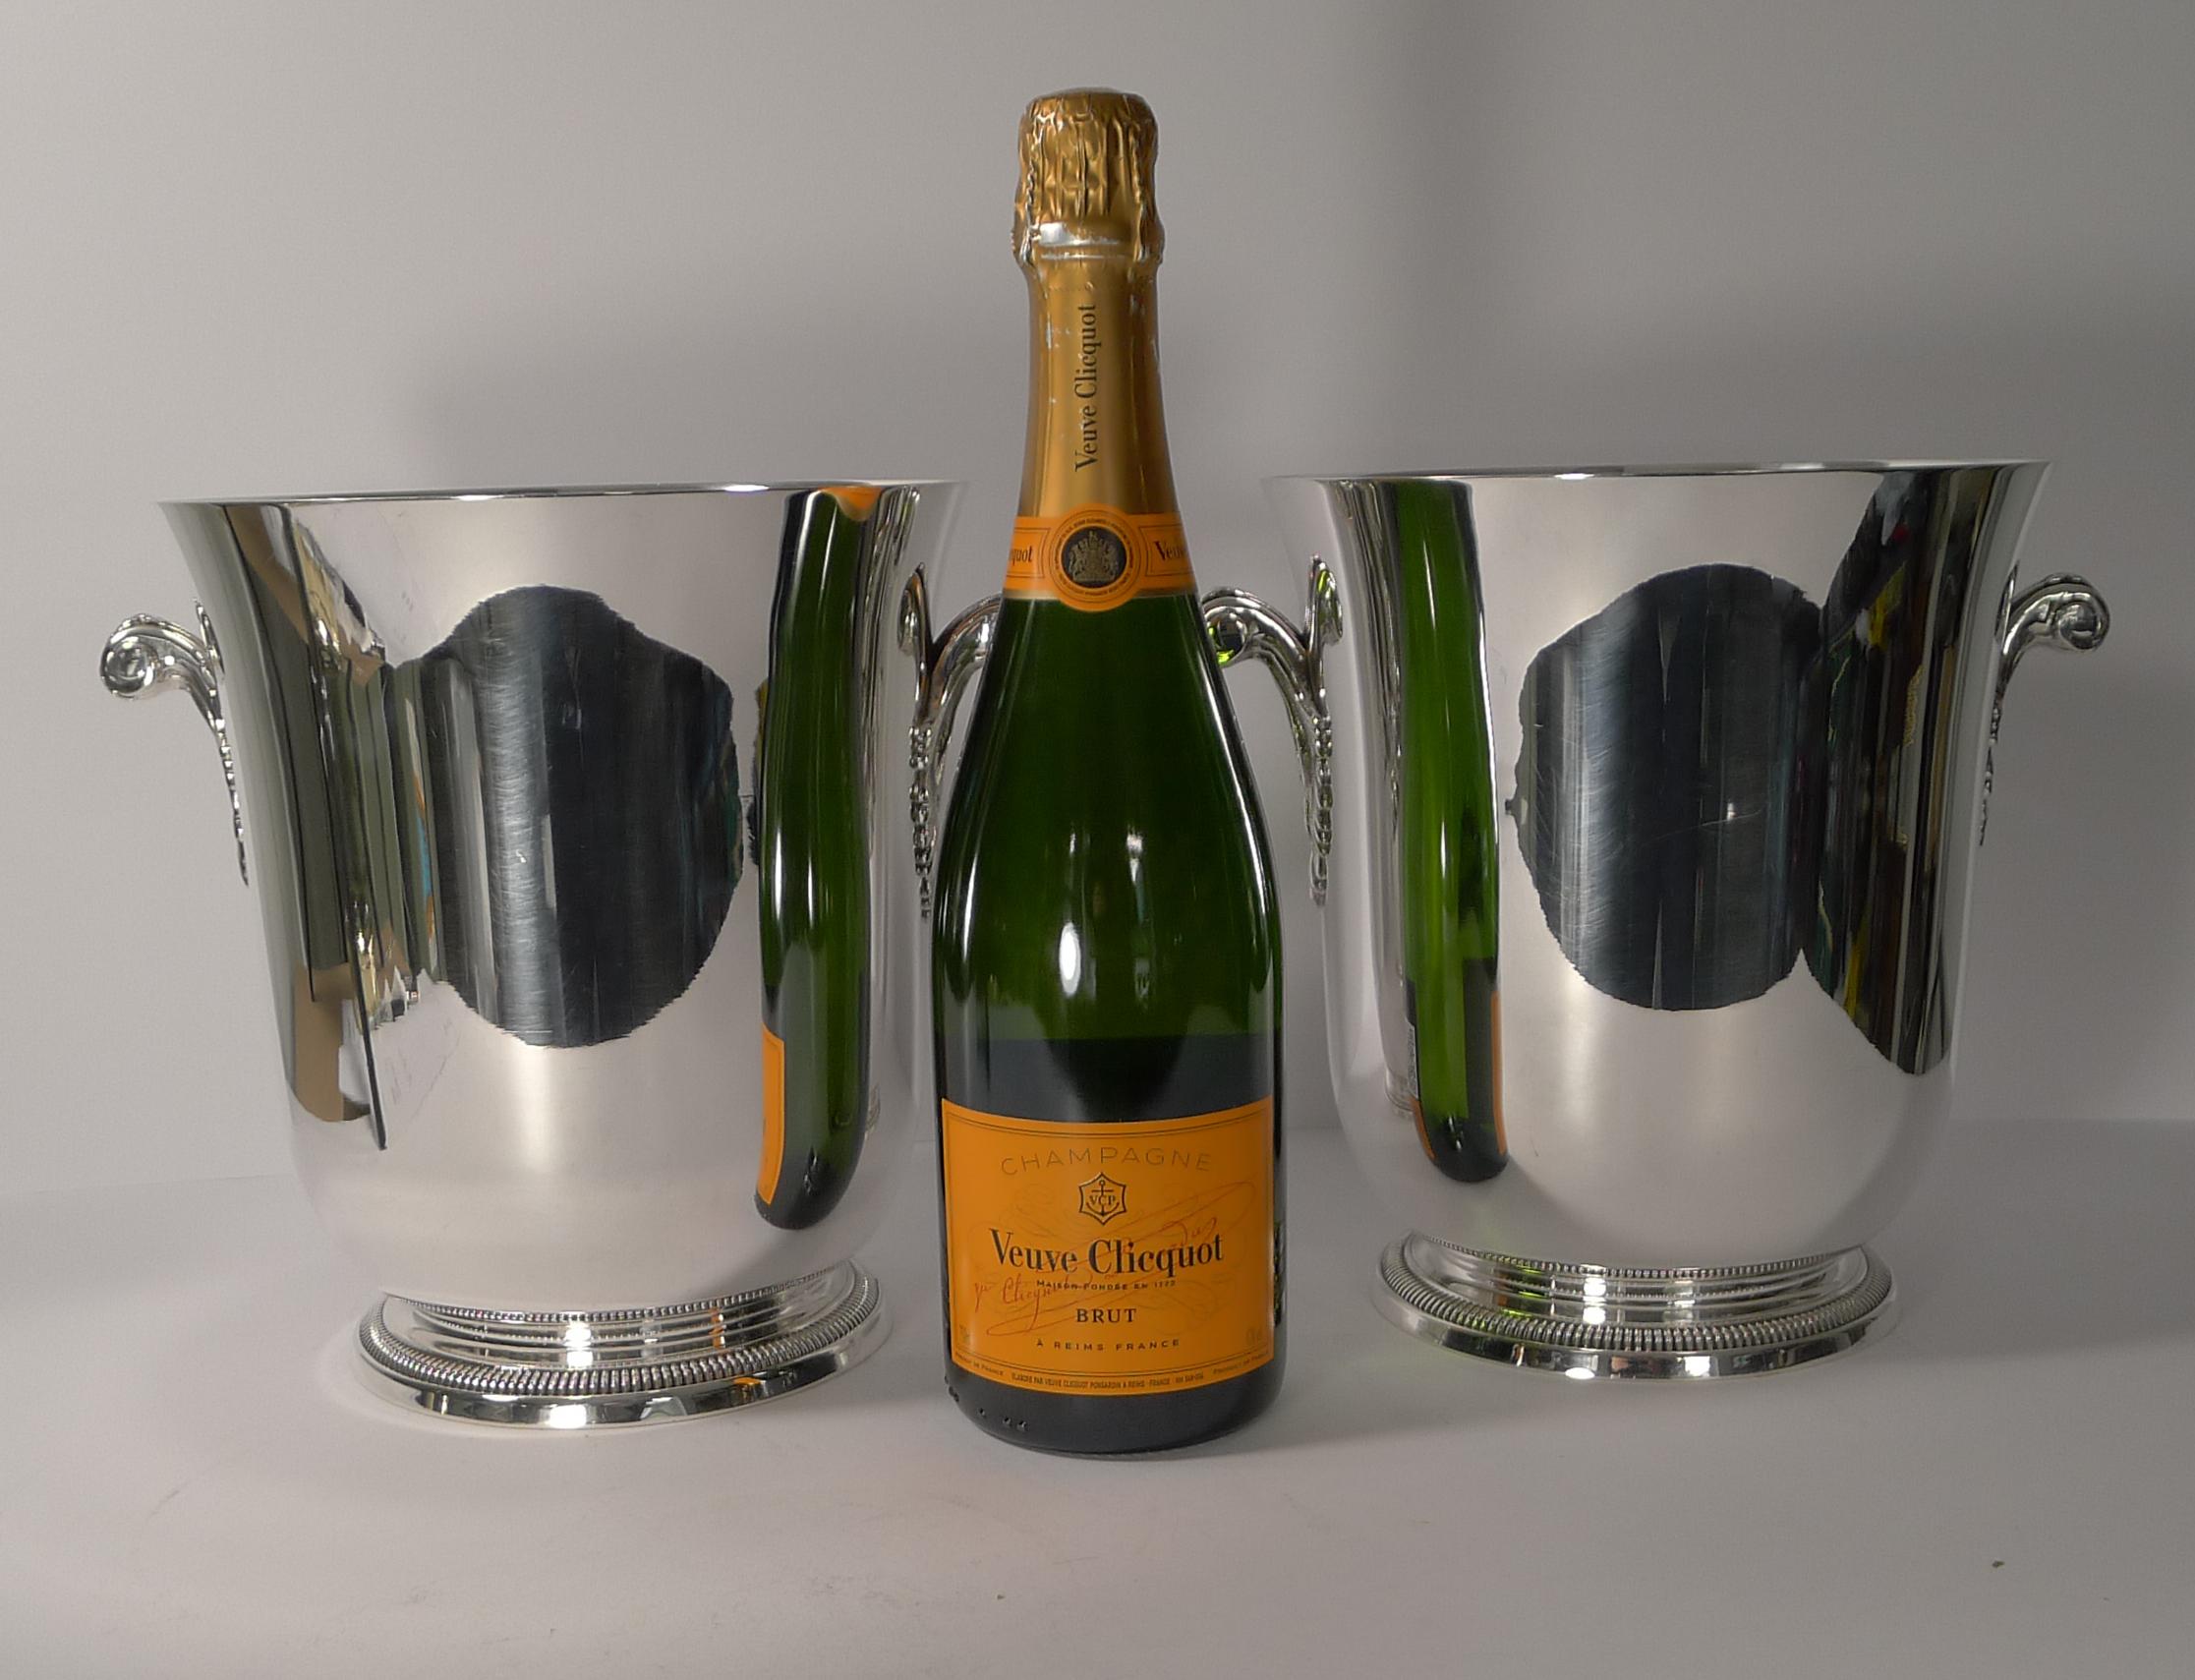 A wonderful pair of vintage wine coolers / Champagne buckets made by the highly prized silversmith, Maison Ercuis.

The simple shape stands on a beaded foot and has two fabulous Art Deco style handles. The underside is where the signature 